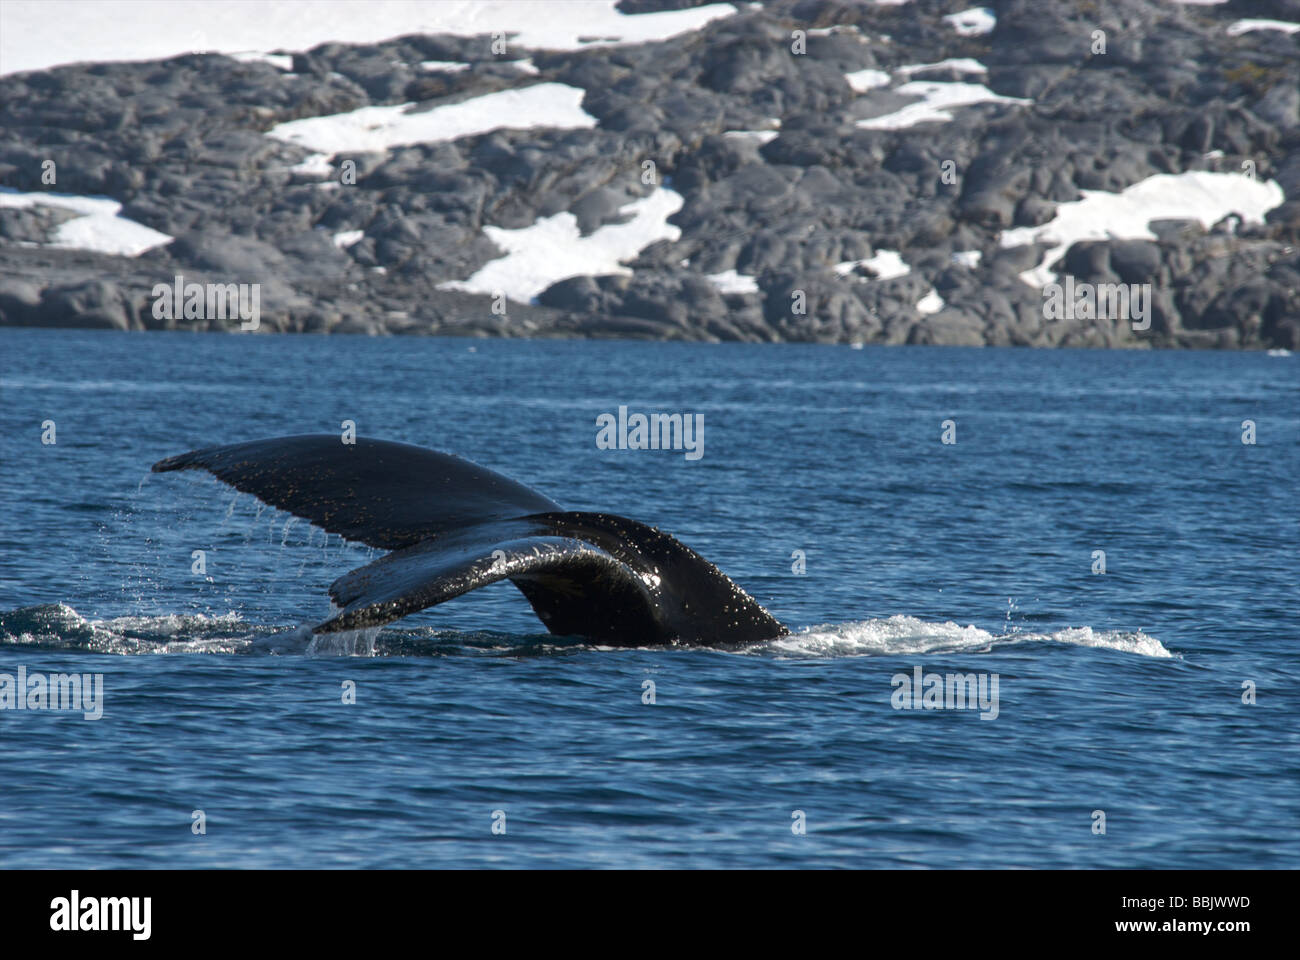 Signature Tail of a Humpback Whale Stock Photo